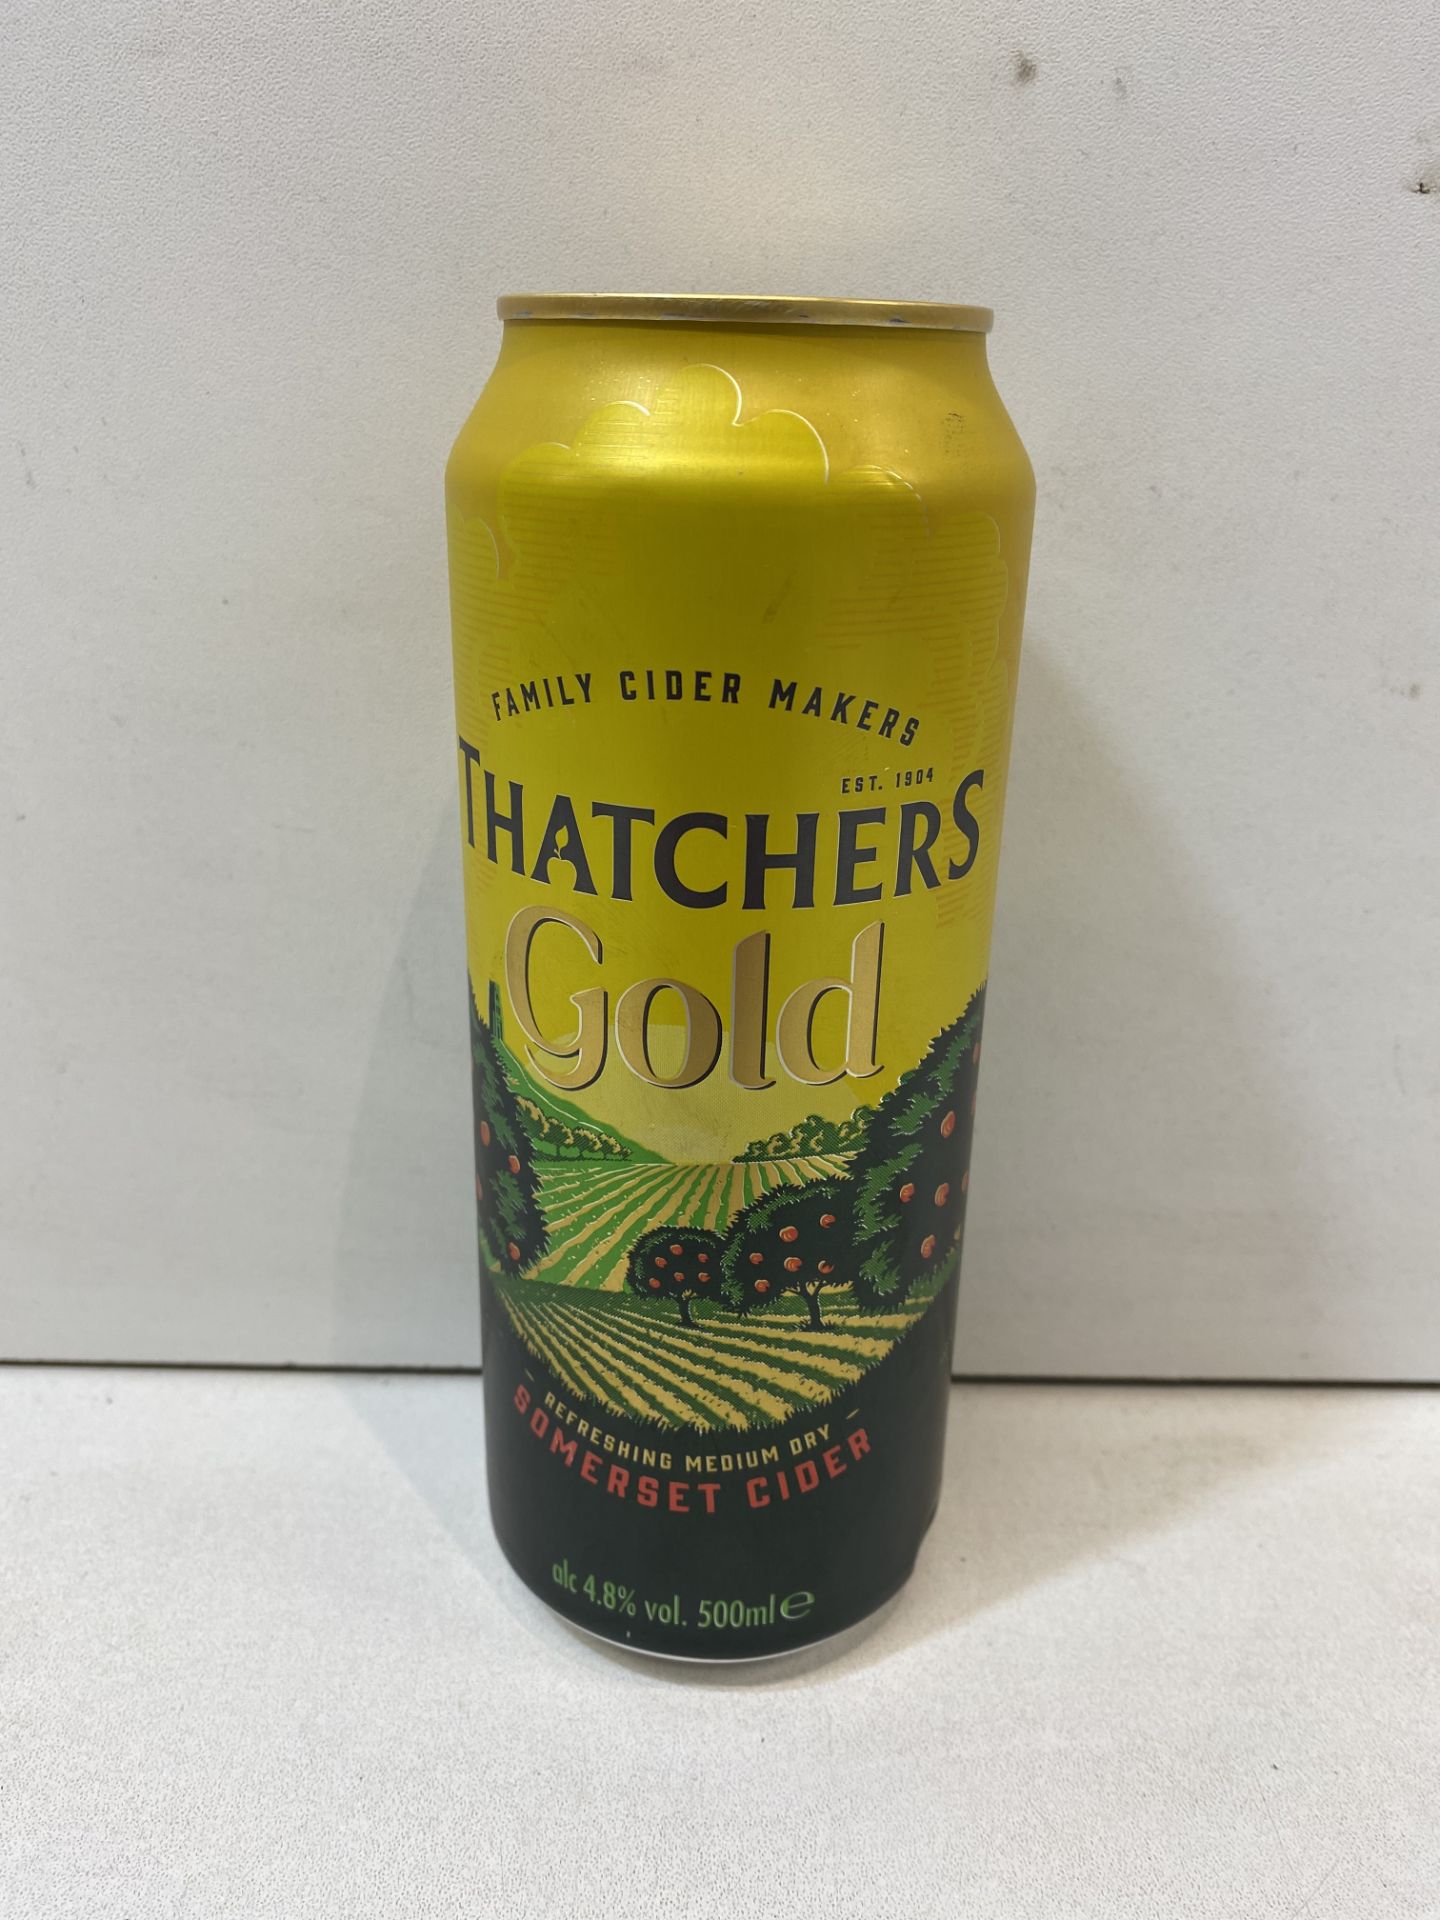 22 x Cans Of Thatcher's Gold Somerset Cider, 500ml, 4.8% Vol